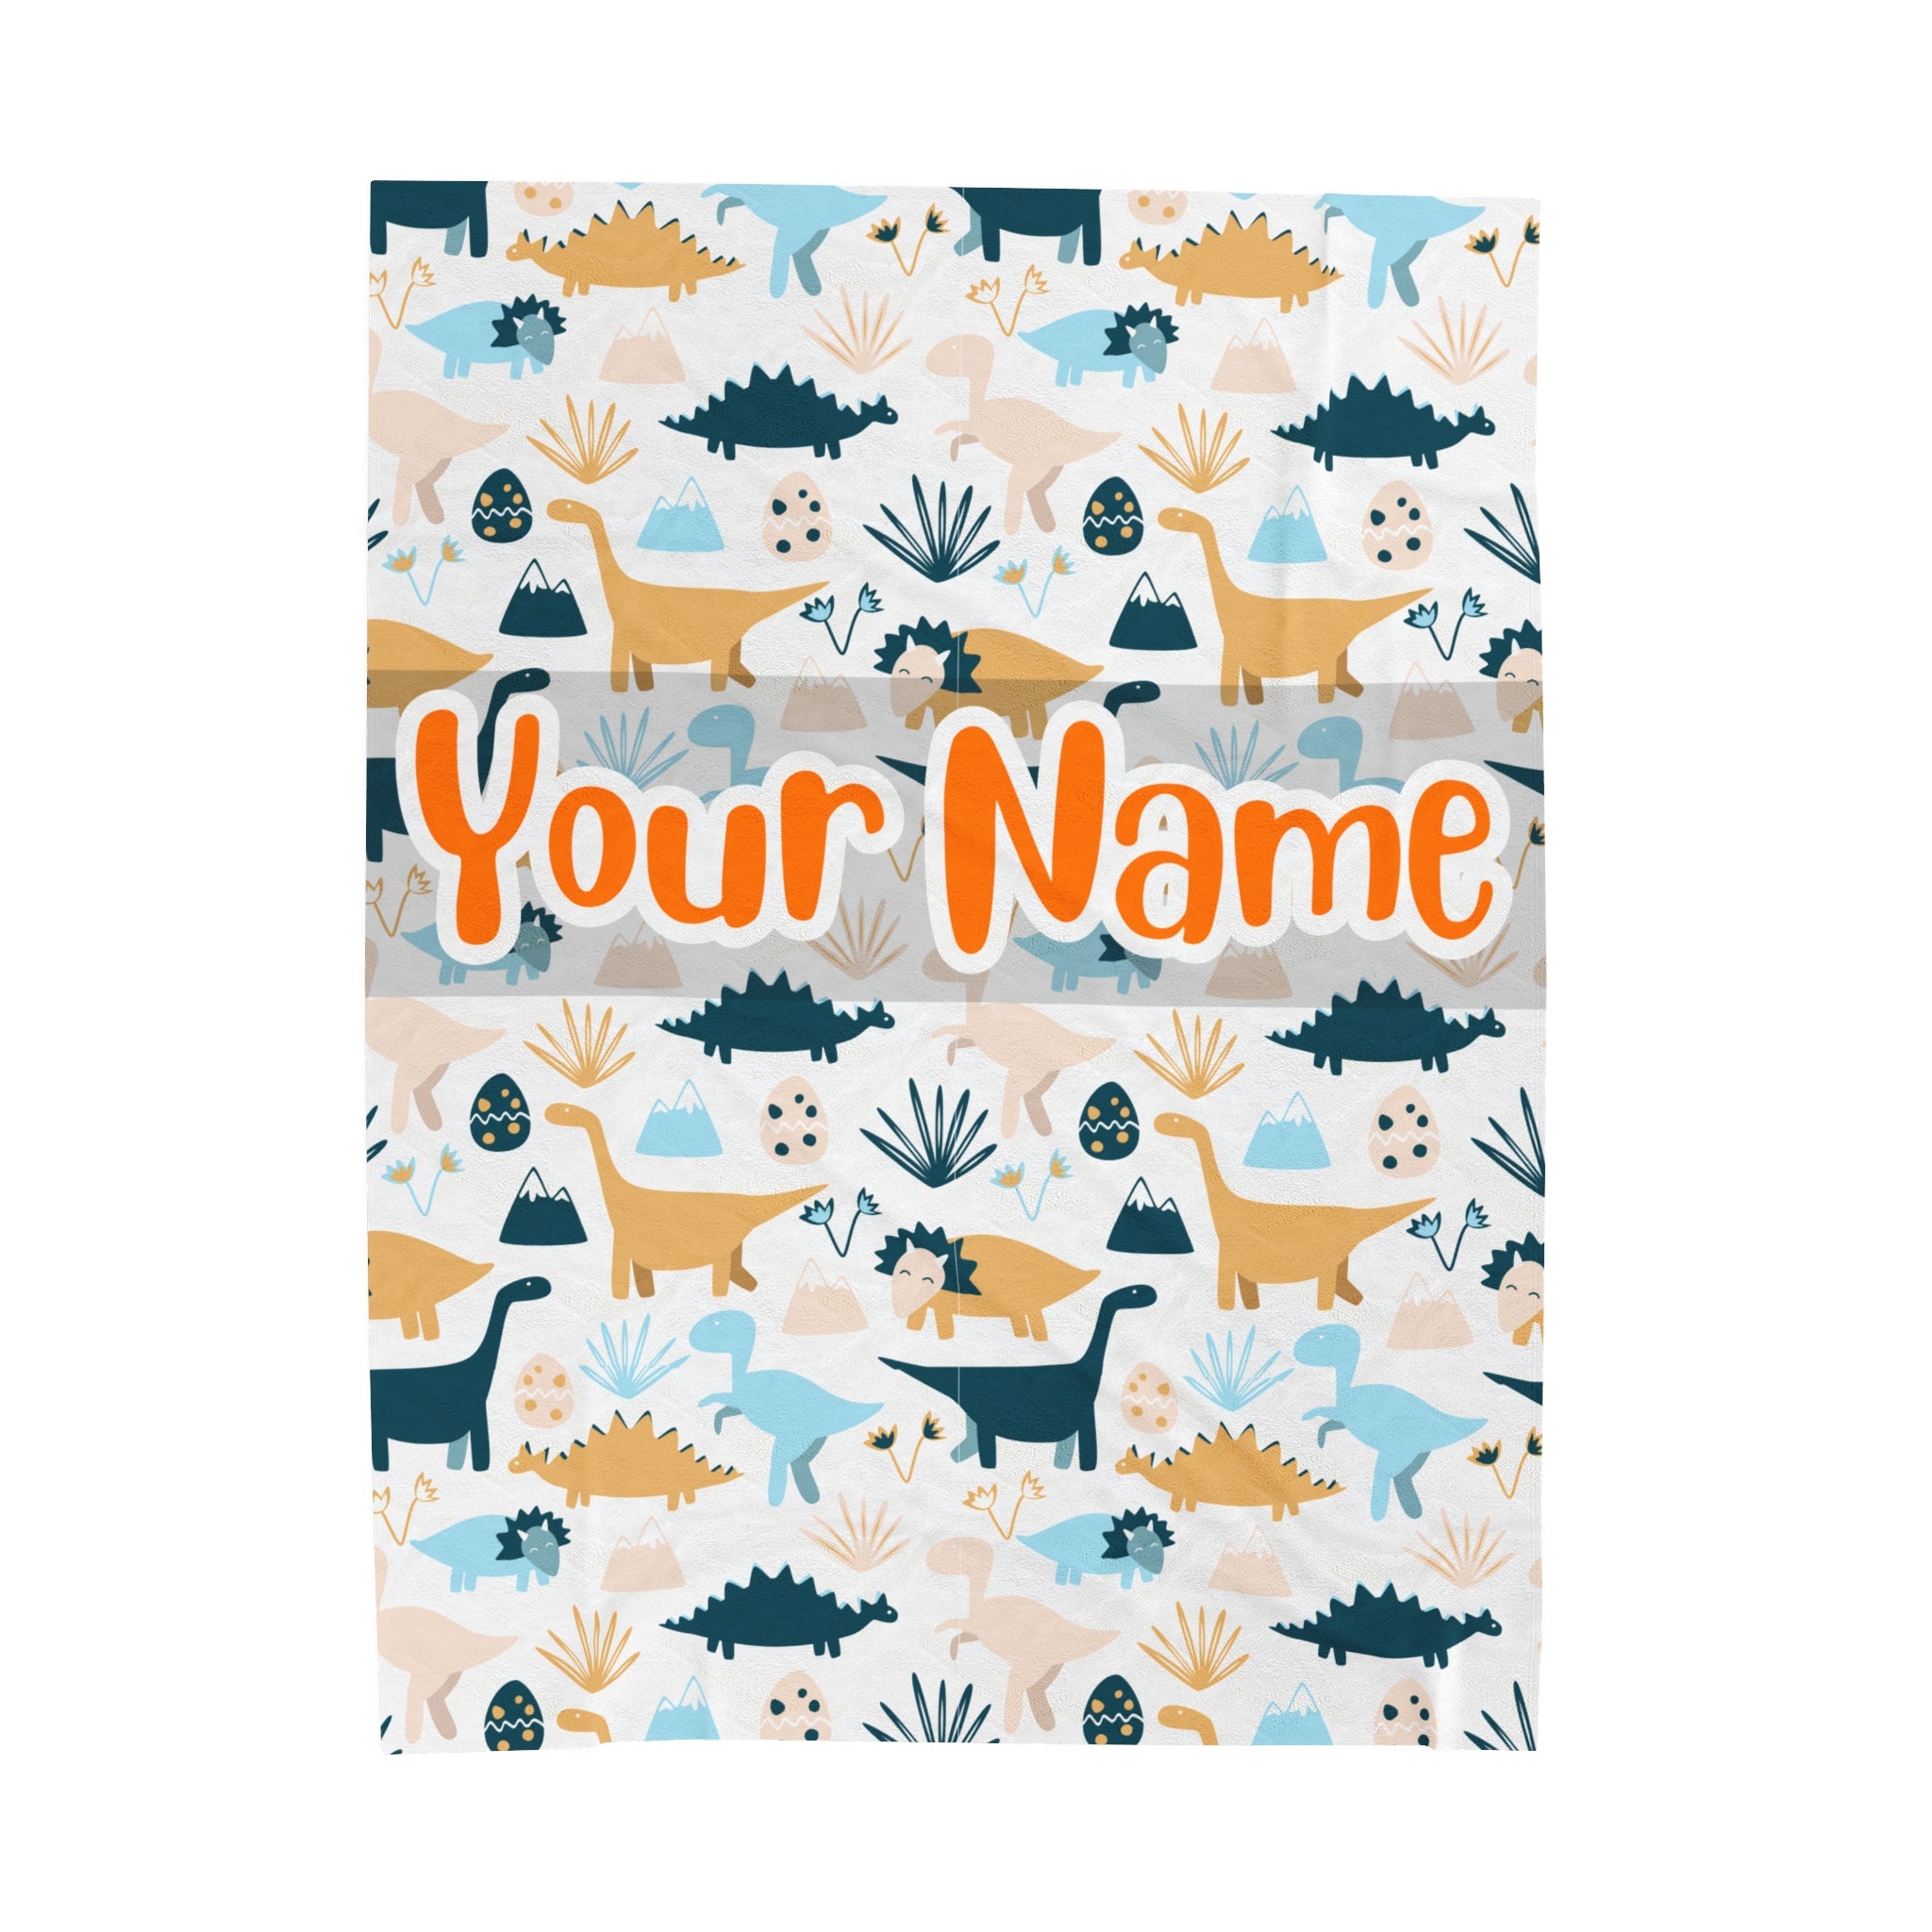 Cute Dinosaur Collections Blanket #8 Custom Blanket with Name - Personalized Blanket